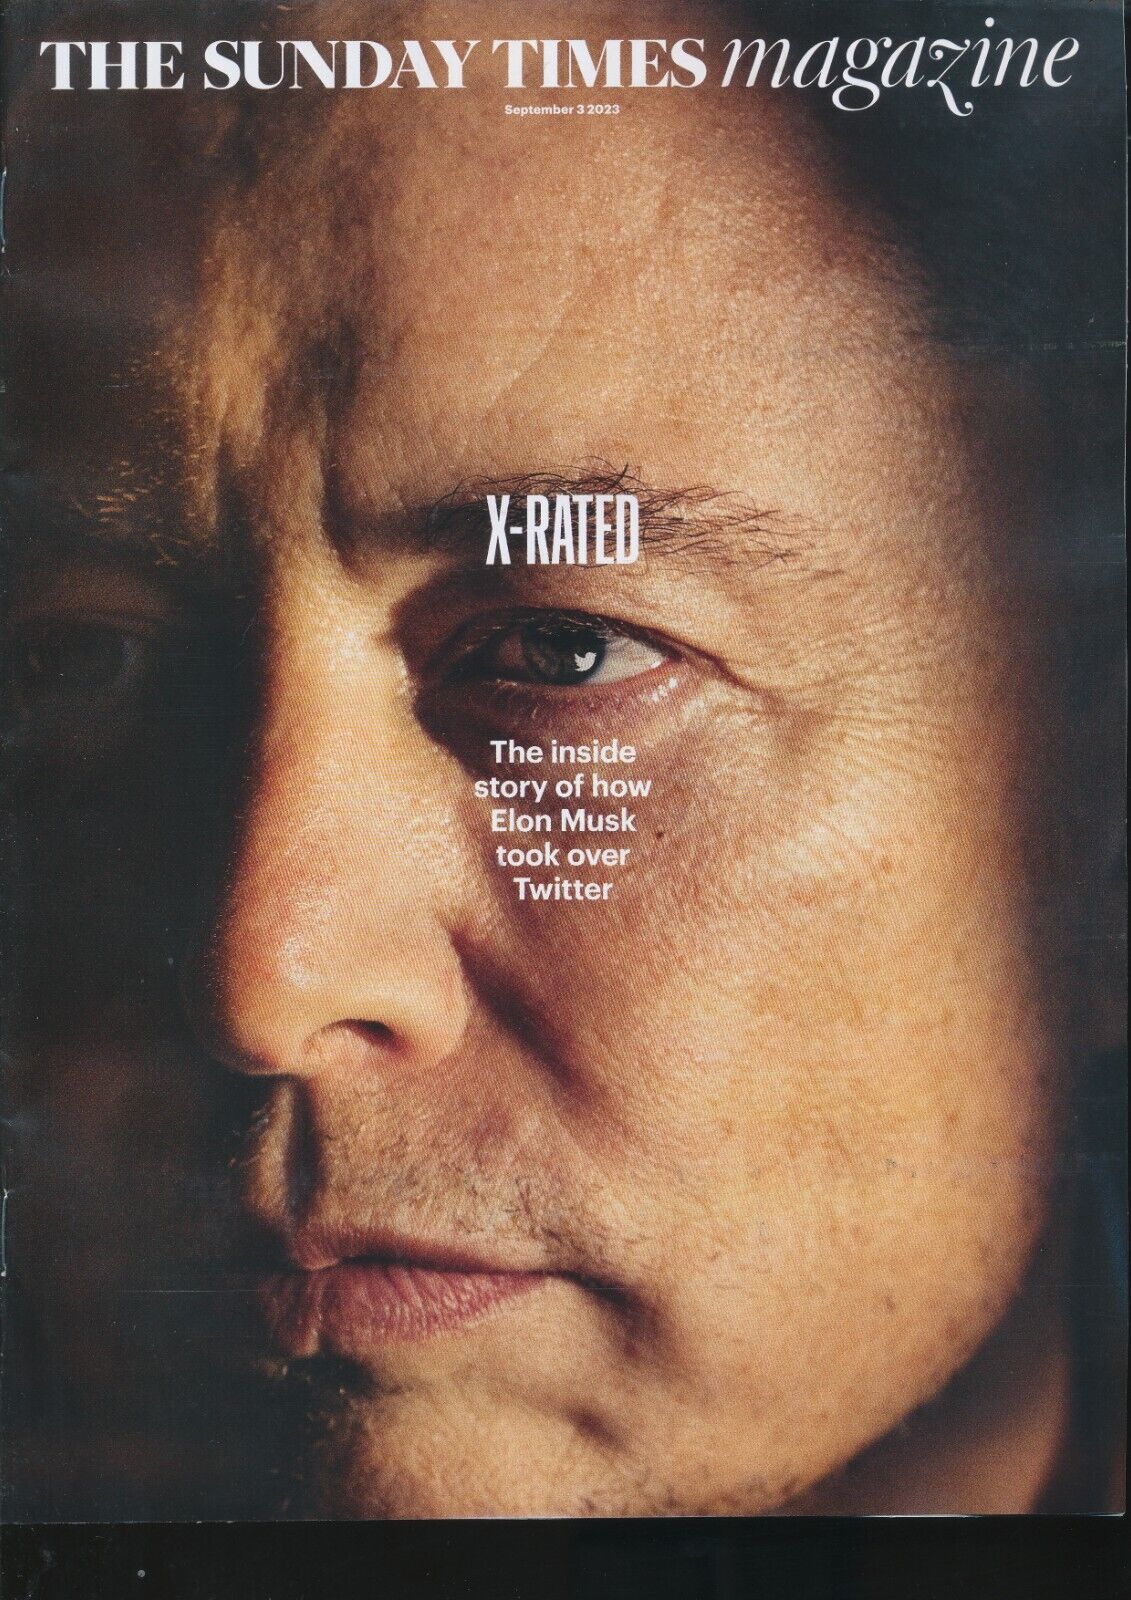 SUNDAY TIMES magazine 3 September 2023 - Elon Musk cover and interview TESLA